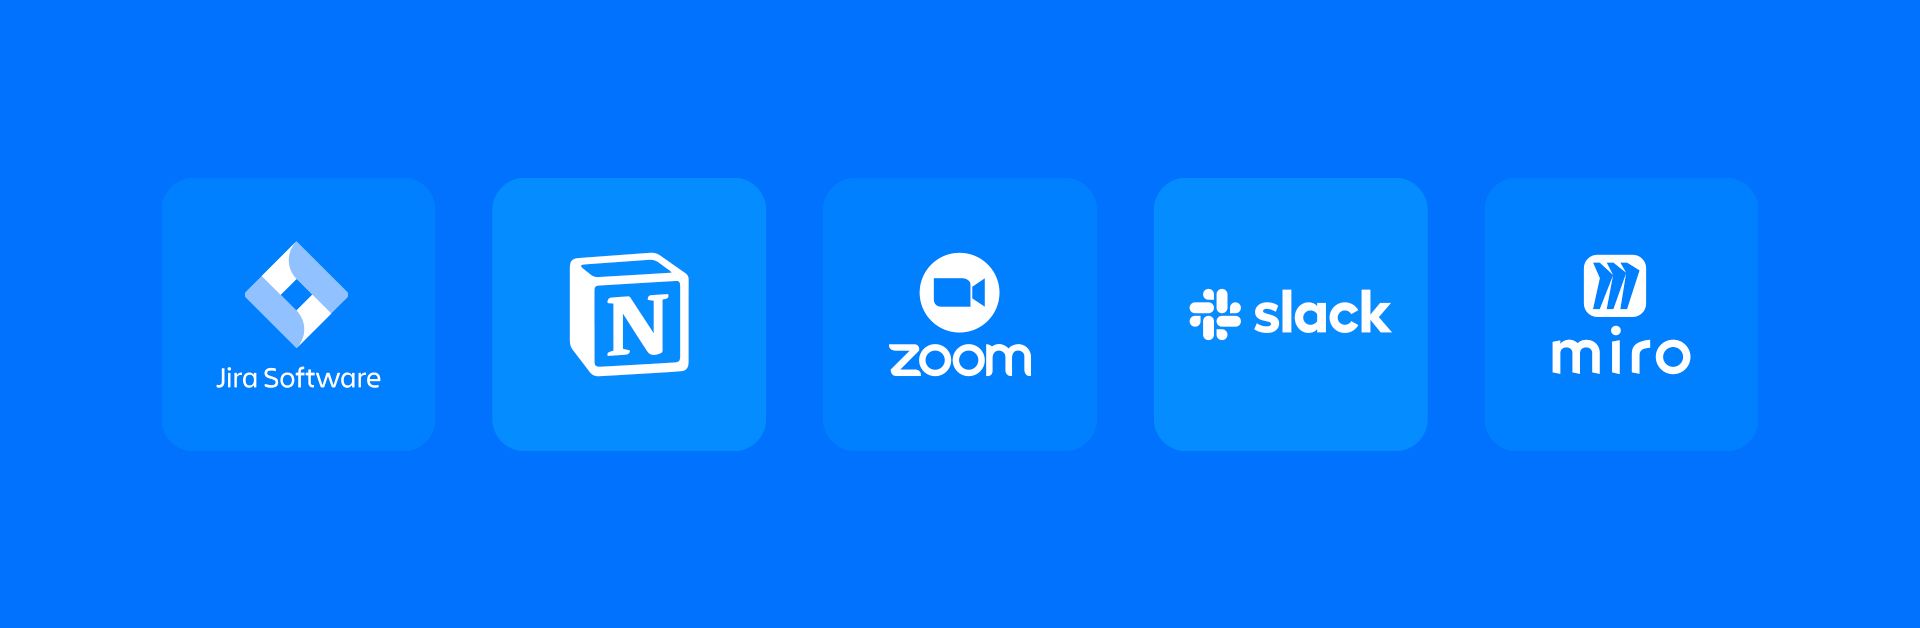 Tools used at our company for improved collaboration and project management: Jira Software, Notion, Zoom, Slack and Miro